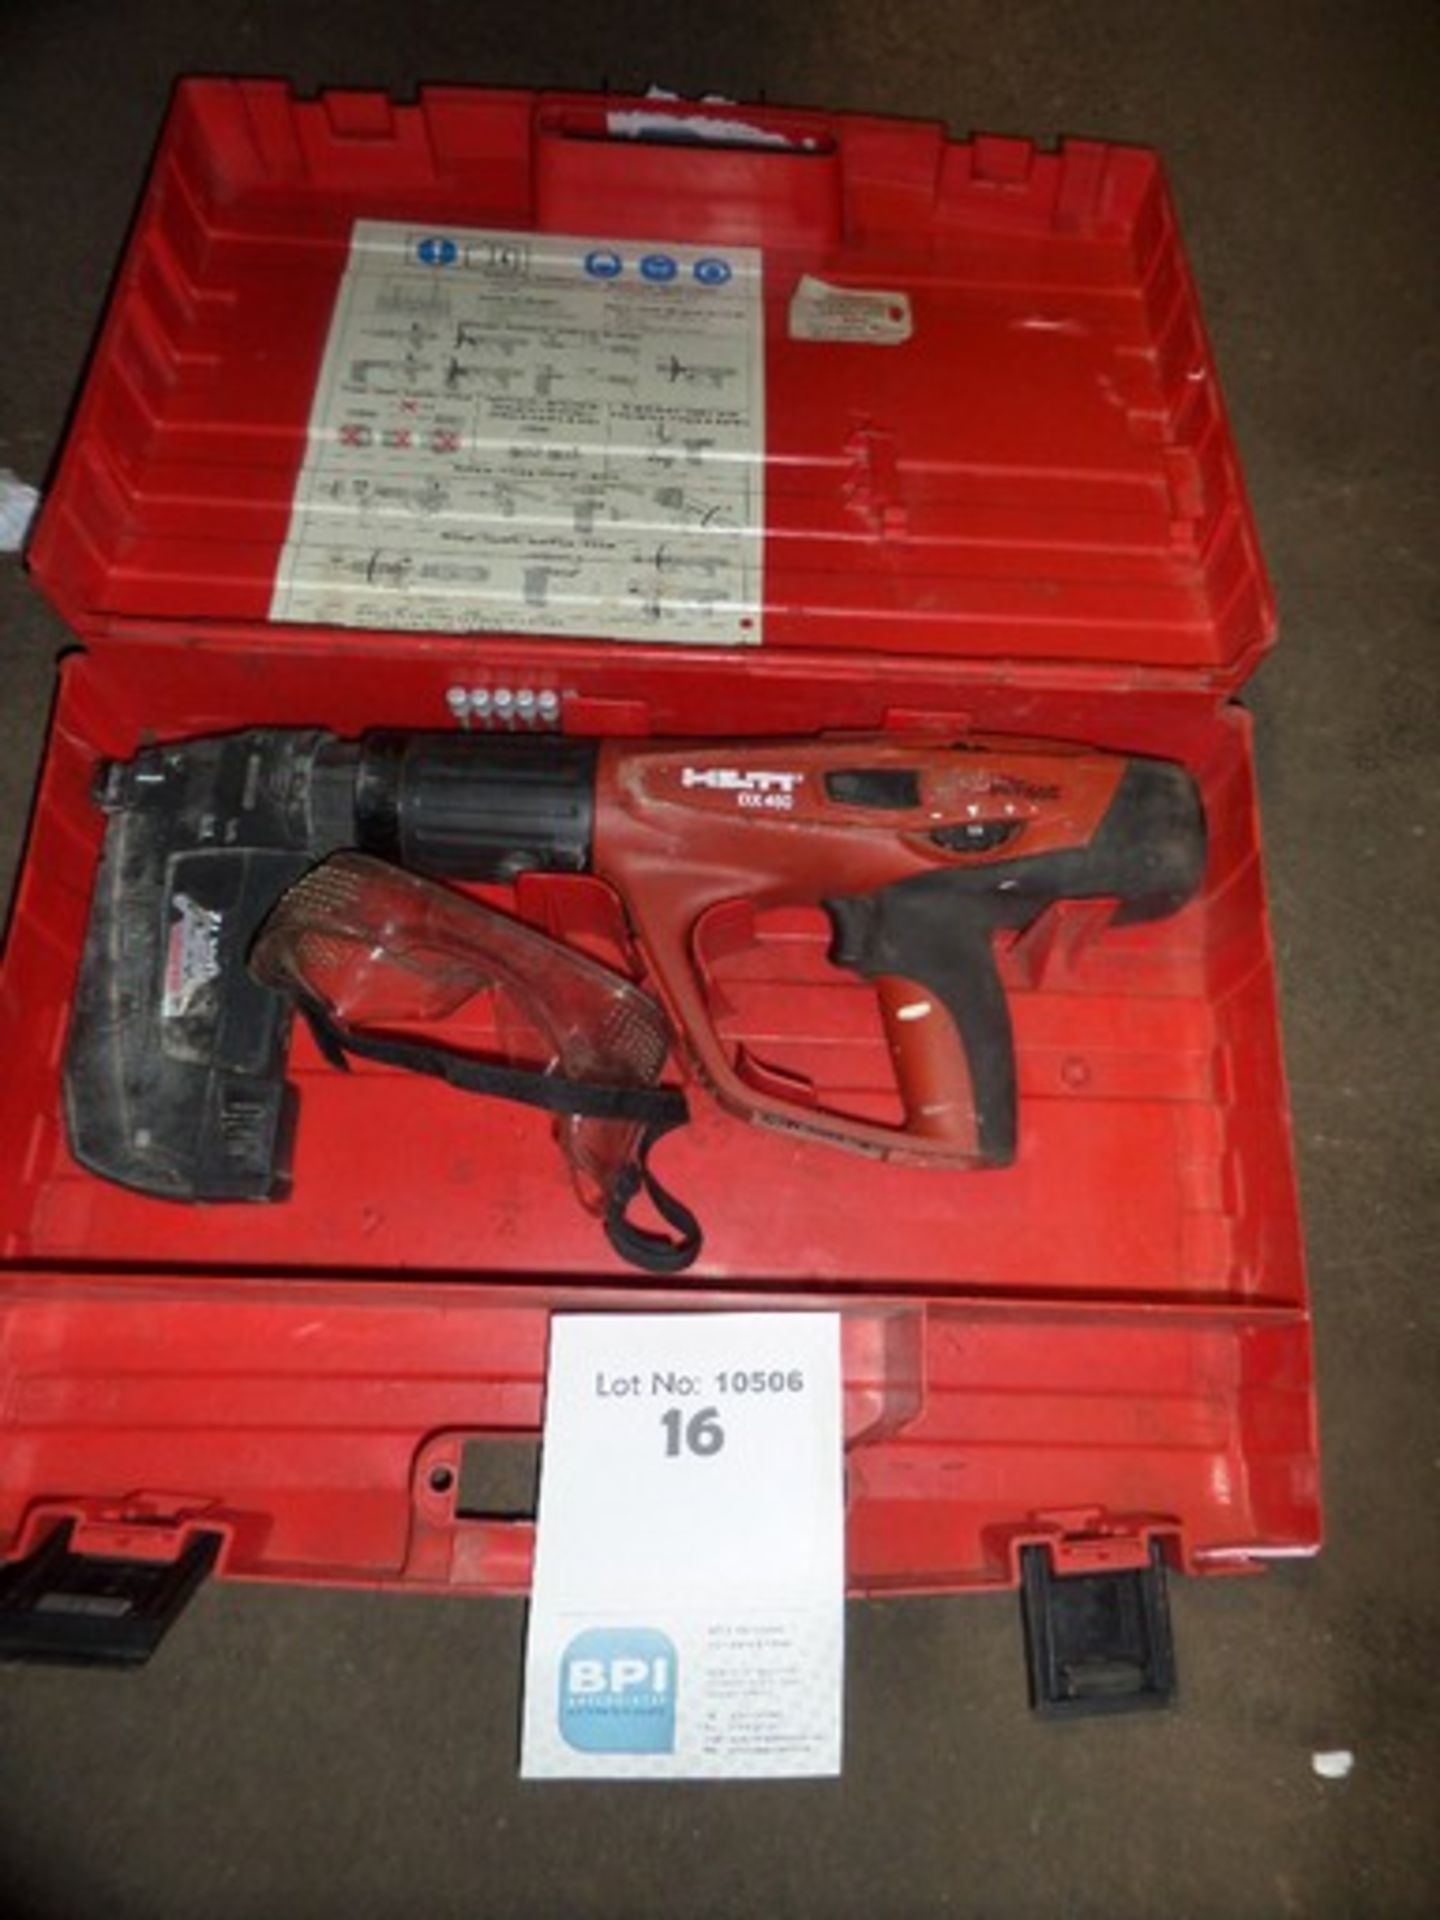 Hilti DX460 {015244} RAPID CARTRIDGE HAMMER Comes in original case with saftey goggles - looks ok